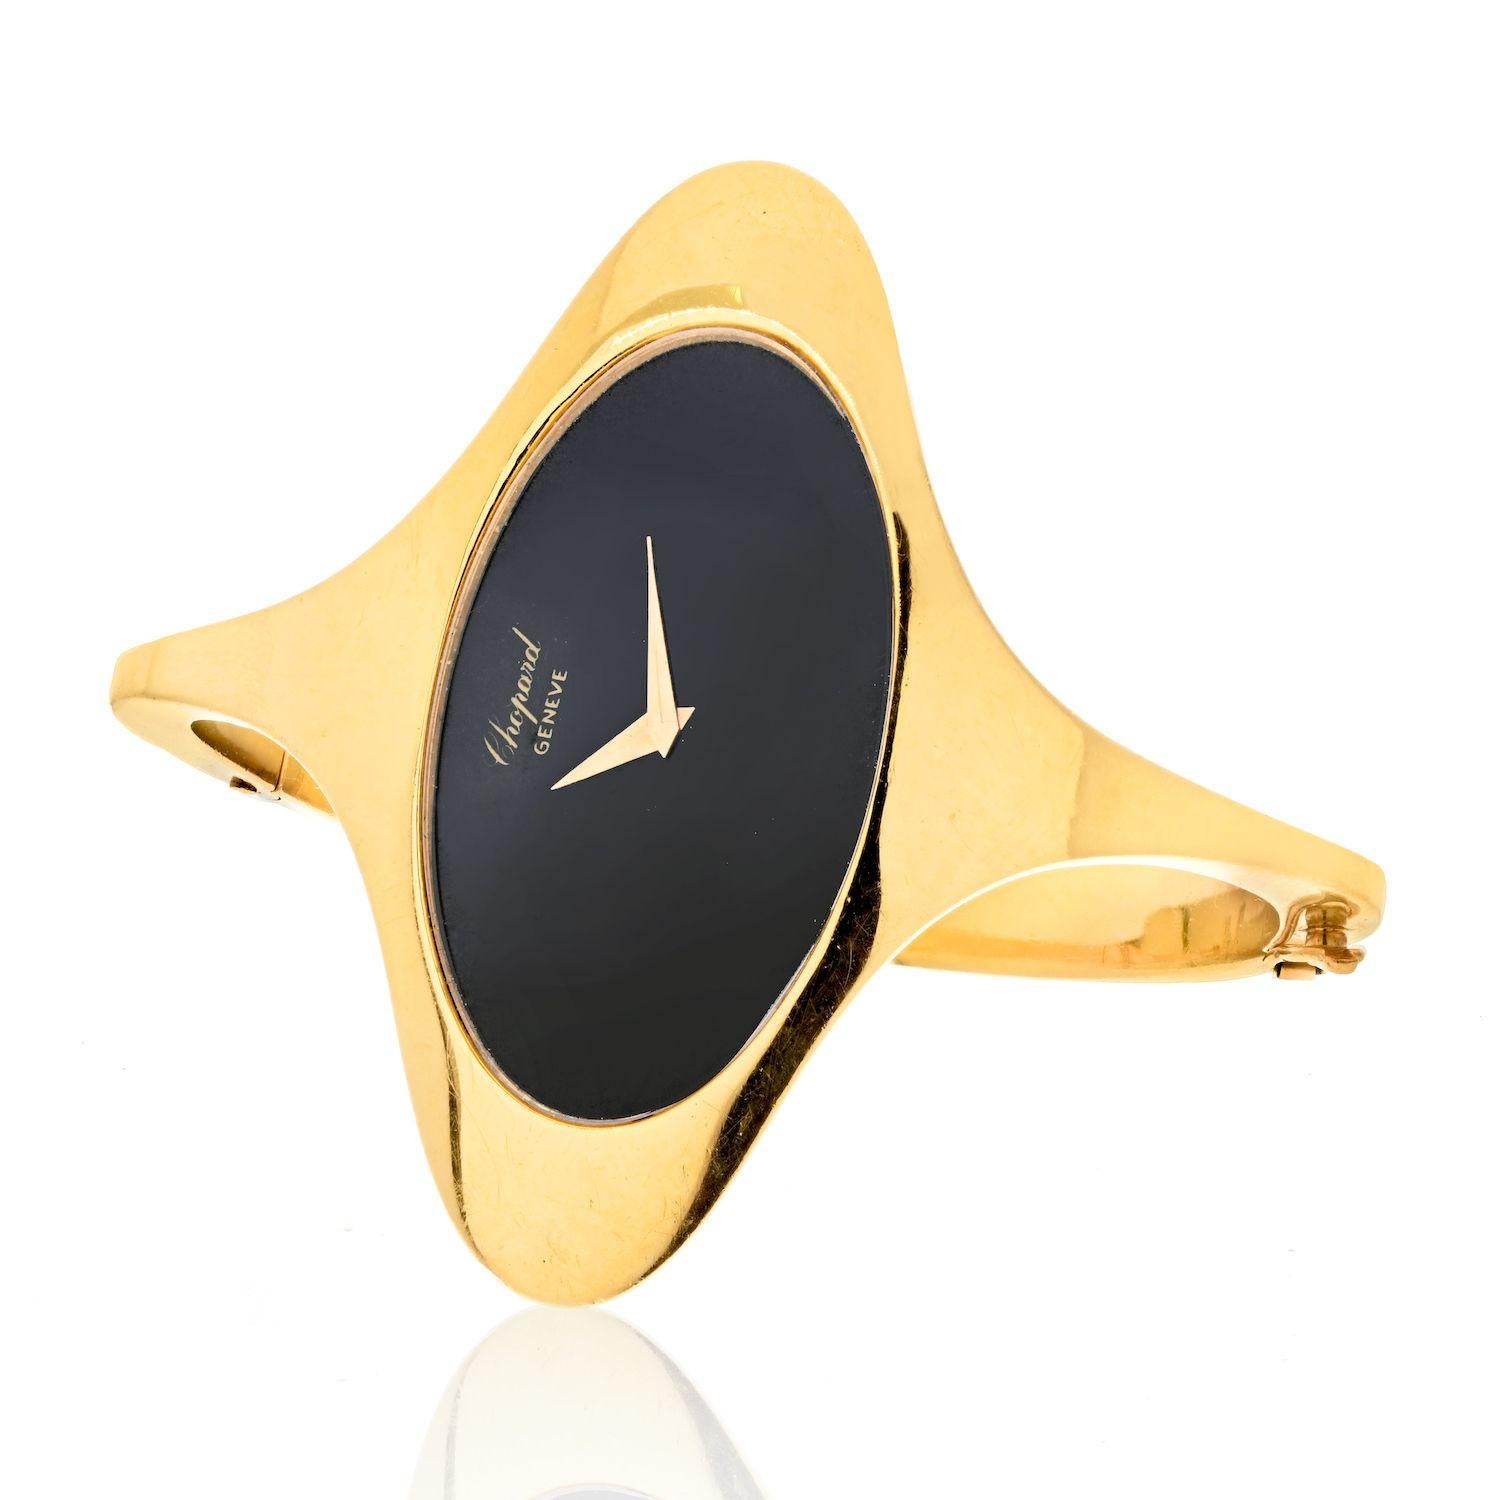 This Chopard Ellipse ref. 5038 18k yellow gold ladies wristwatch is a stunning piece of craftsmanship. It features a black dial with a unique shape design that is both elegant and luxurious. The case is made from 18k yellow goldand measures 53mm x